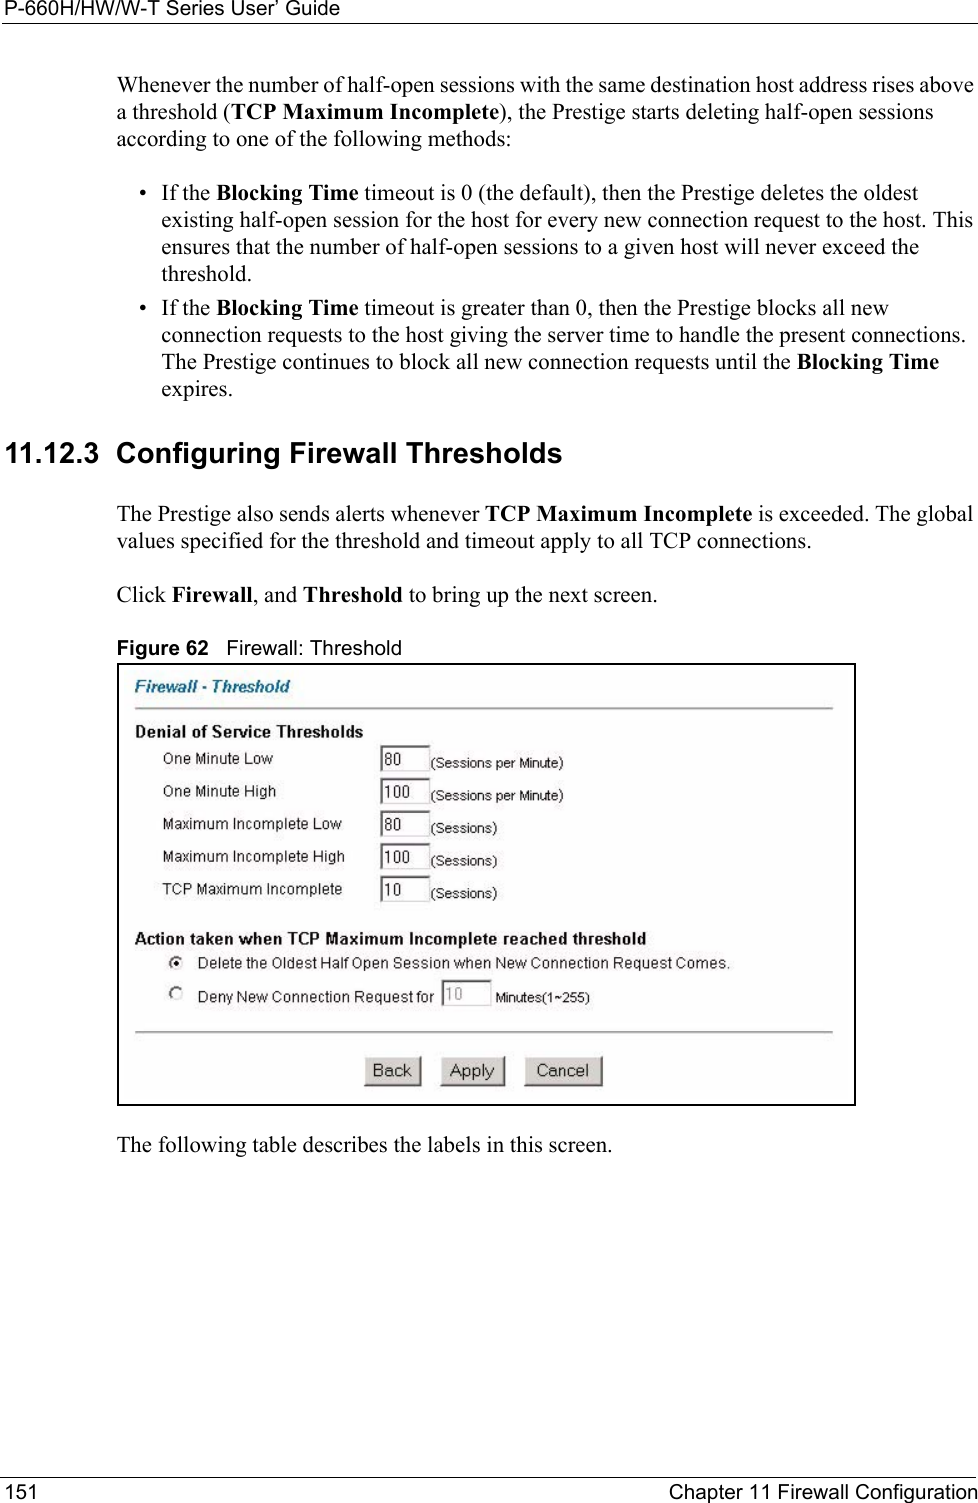 P-660H/HW/W-T Series User’ Guide151 Chapter 11 Firewall ConfigurationWhenever the number of half-open sessions with the same destination host address rises above a threshold (TCP Maximum Incomplete), the Prestige starts deleting half-open sessions according to one of the following methods:• If the Blocking Time timeout is 0 (the default), then the Prestige deletes the oldest existing half-open session for the host for every new connection request to the host. This ensures that the number of half-open sessions to a given host will never exceed the threshold. • If the Blocking Time timeout is greater than 0, then the Prestige blocks all new connection requests to the host giving the server time to handle the present connections. The Prestige continues to block all new connection requests until the Blocking Time expires. 11.12.3  Configuring Firewall Thresholds The Prestige also sends alerts whenever TCP Maximum Incomplete is exceeded. The global values specified for the threshold and timeout apply to all TCP connections. Click Firewall, and Threshold to bring up the next screen.Figure 62   Firewall: ThresholdThe following table describes the labels in this screen.